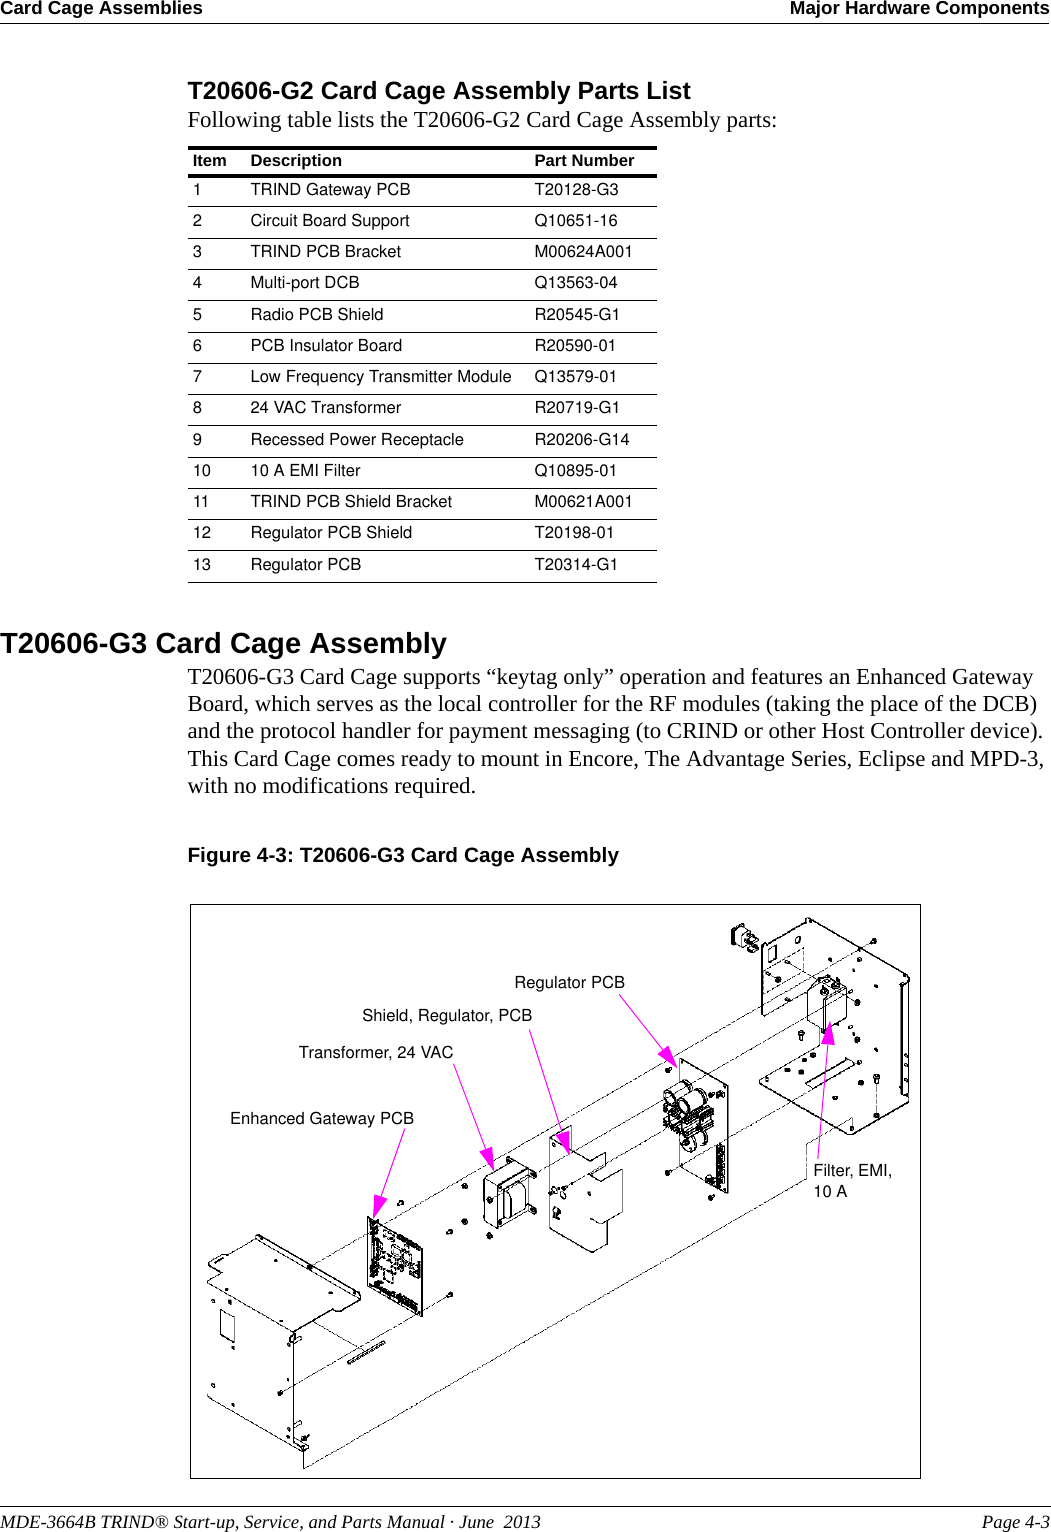 MDE-3664B TRIND® Start-up, Service, and Parts Manual · June  2013 Page 4-3Card Cage Assemblies Major Hardware ComponentsT20606-G2 Card Cage Assembly Parts ListFollowing table lists the T20606-G2 Card Cage Assembly parts:Item Description Part Number1TRIND Gateway PCB T20128-G32Circuit Board Support Q10651-163TRIND PCB Bracket M00624A0014Multi-port DCB Q13563-045Radio PCB Shield R20545-G16PCB Insulator Board R20590-017Low Frequency Transmitter Module Q13579-01824 VAC Transformer R20719-G19Recessed Power Receptacle R20206-G1410 10 A EMI Filter Q10895-0111 TRIND PCB Shield Bracket M00621A00112 Regulator PCB Shield T20198-0113 Regulator PCB T20314-G1T20606-G3 Card Cage AssemblyT20606-G3 Card Cage supports “keytag only” operation and features an Enhanced Gateway Board, which serves as the local controller for the RF modules (taking the place of the DCB) and the protocol handler for payment messaging (to CRIND or other Host Controller device). This Card Cage comes ready to mount in Encore, The Advantage Series, Eclipse and MPD-3, with no modifications required.Figure 4-3: T20606-G3 Card Cage AssemblyRegulator PCBEnhanced Gateway PCBShield, Regulator, PCBFilter, EMI, 10 ATransformer, 24 VAC